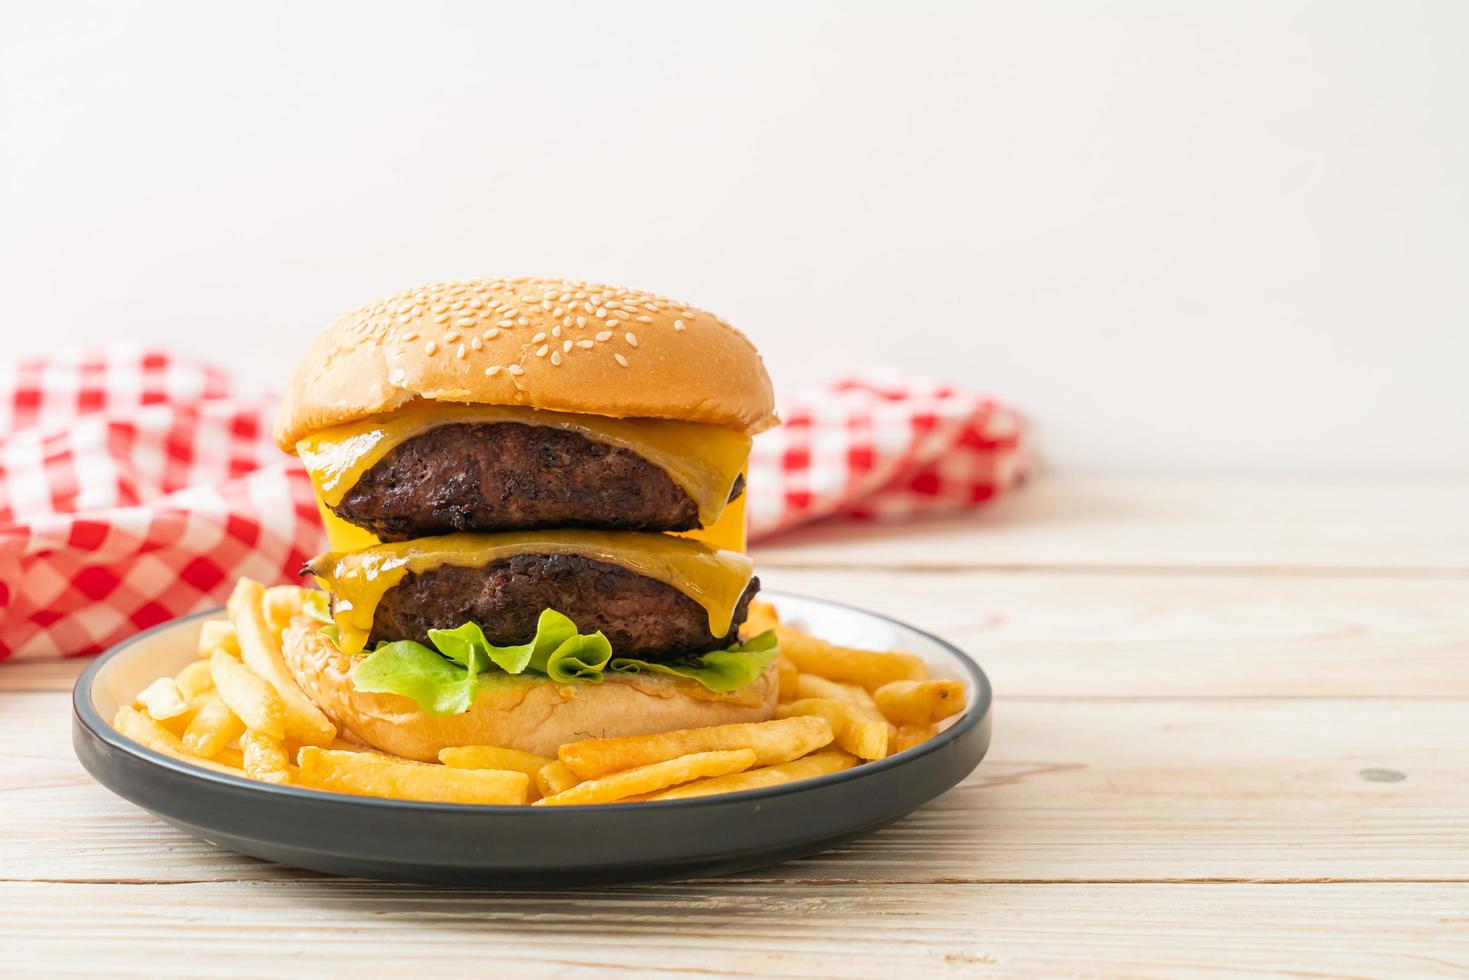 Hamburger or beef burgers with cheese and french fries - unhealthy food style photo